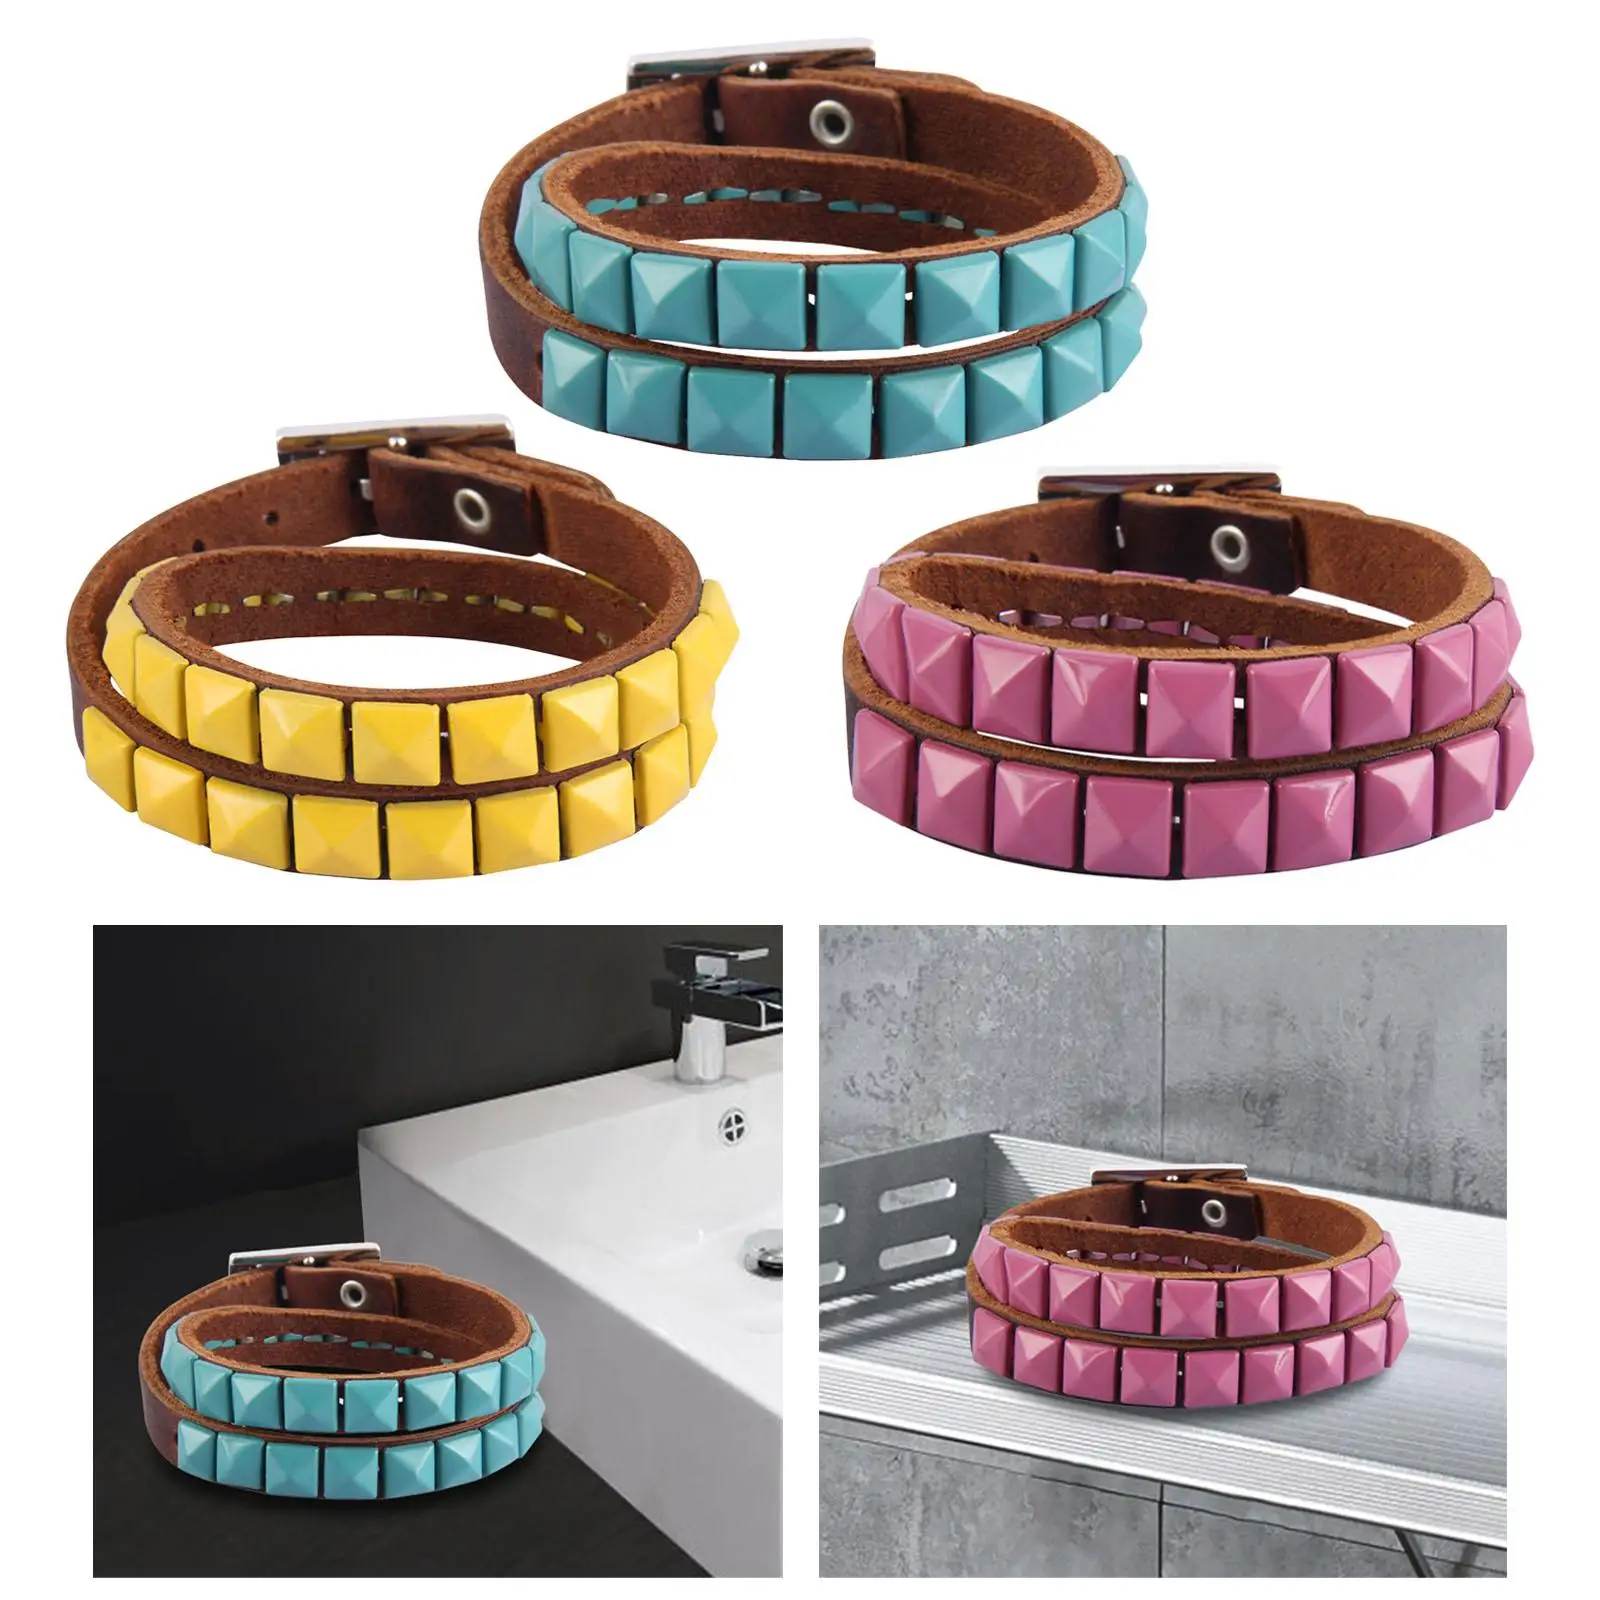 PU Leather Studded Bracelet Buckle Clasp Cuff Bangle for Men Women Costume Accessories